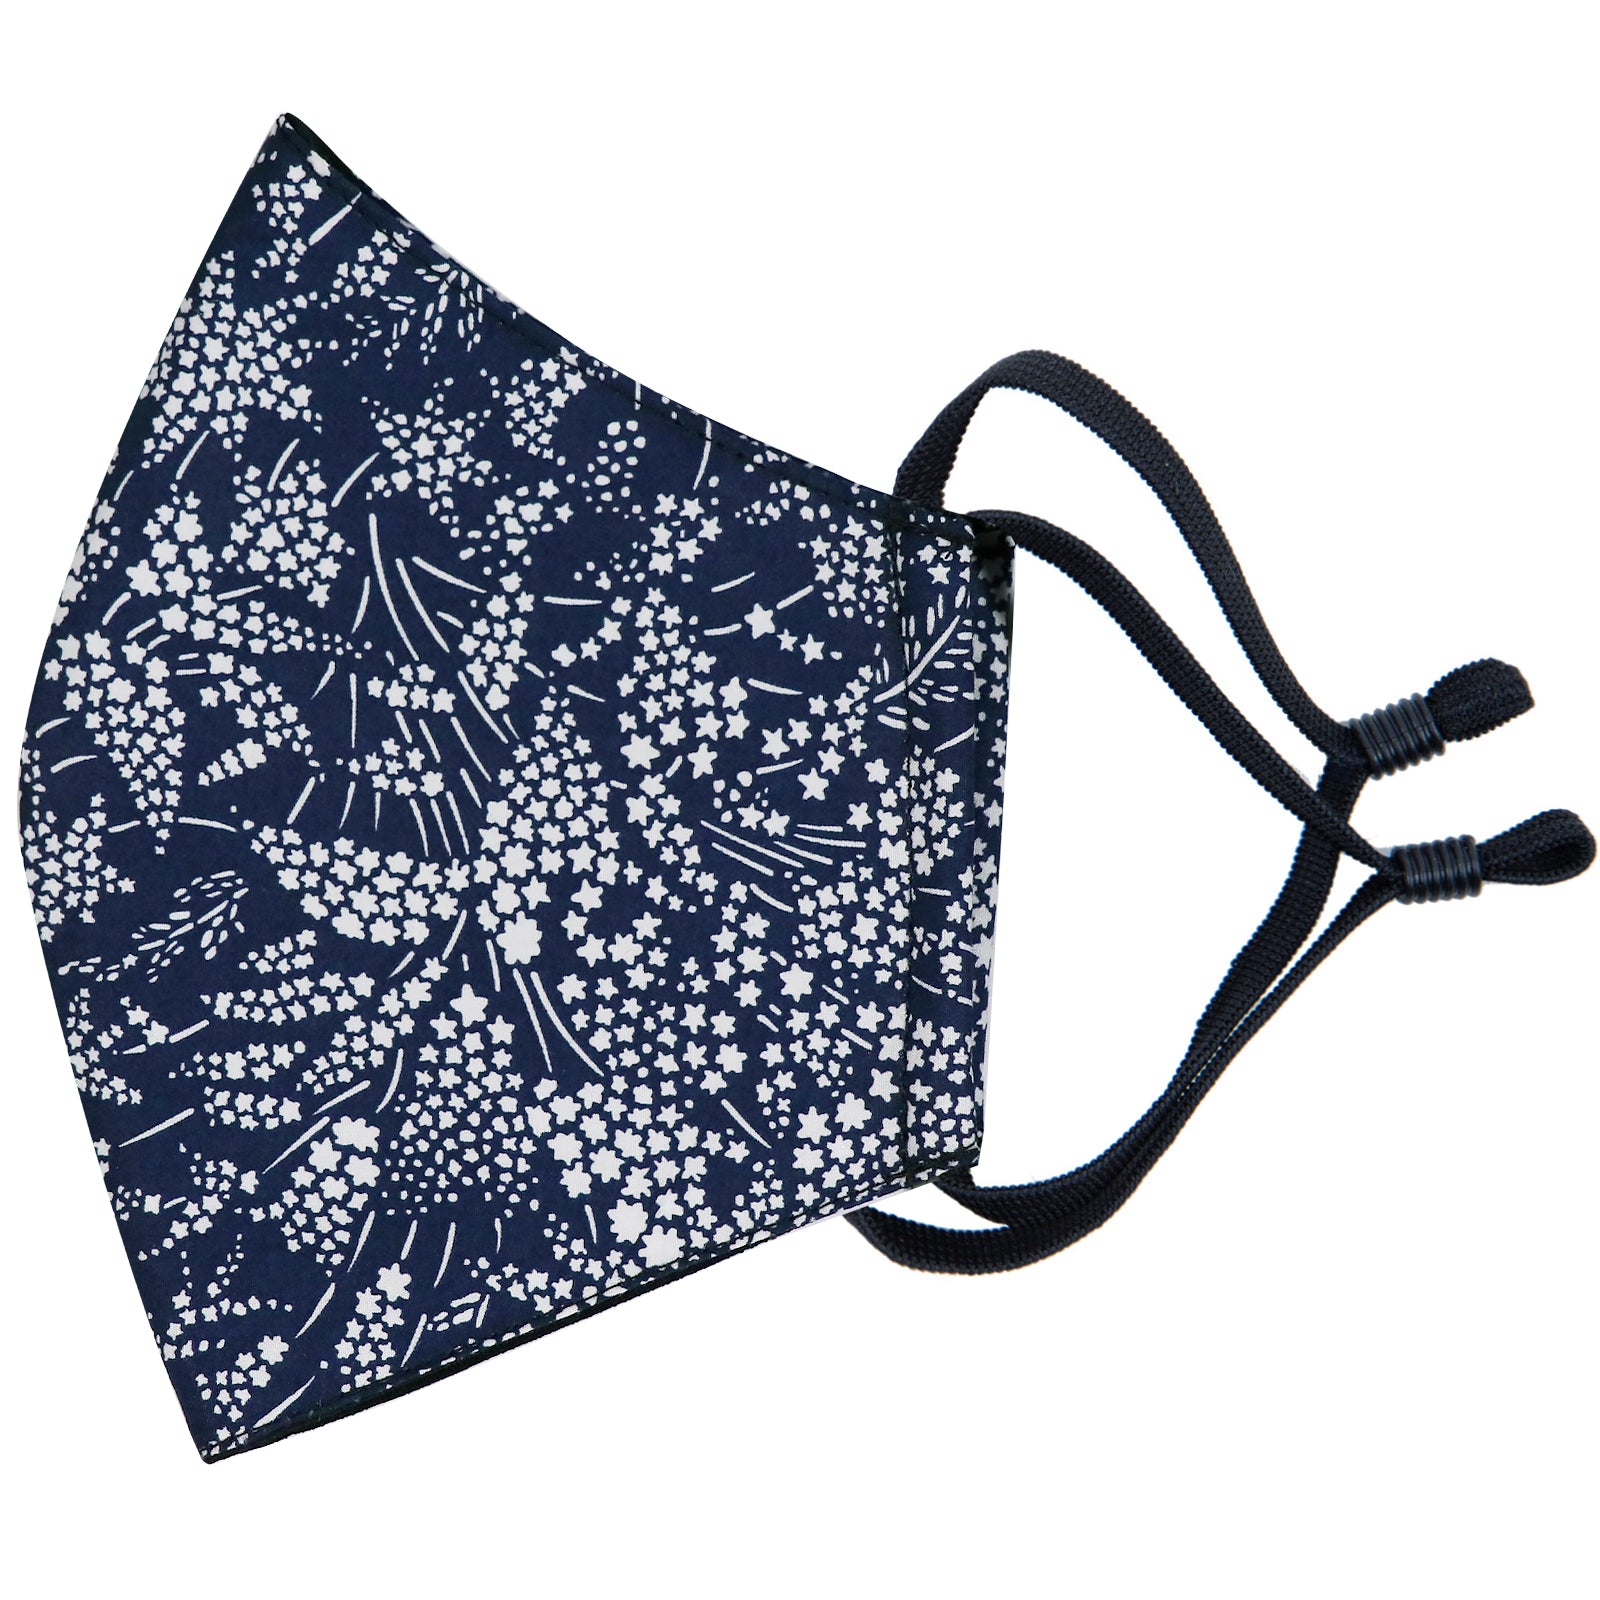 Parisian with Liberty Face Mask - LIMITED EDITION - Whispering Stars